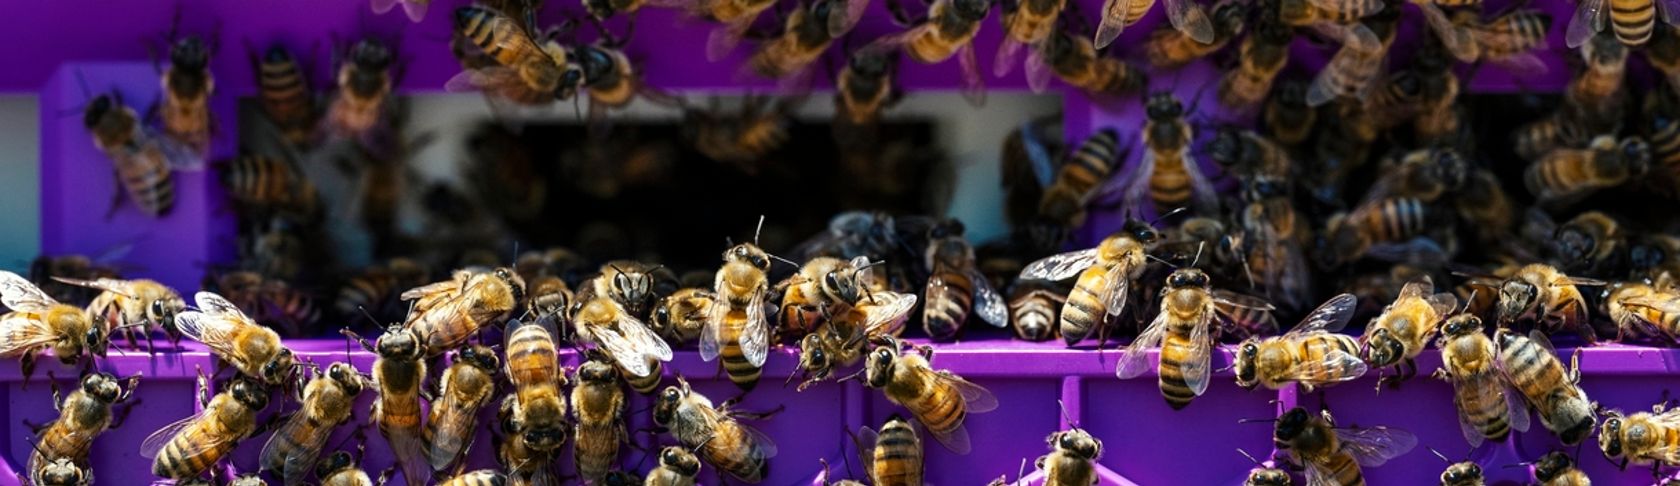 Zero hunger and proper nutrition: the importance of bees